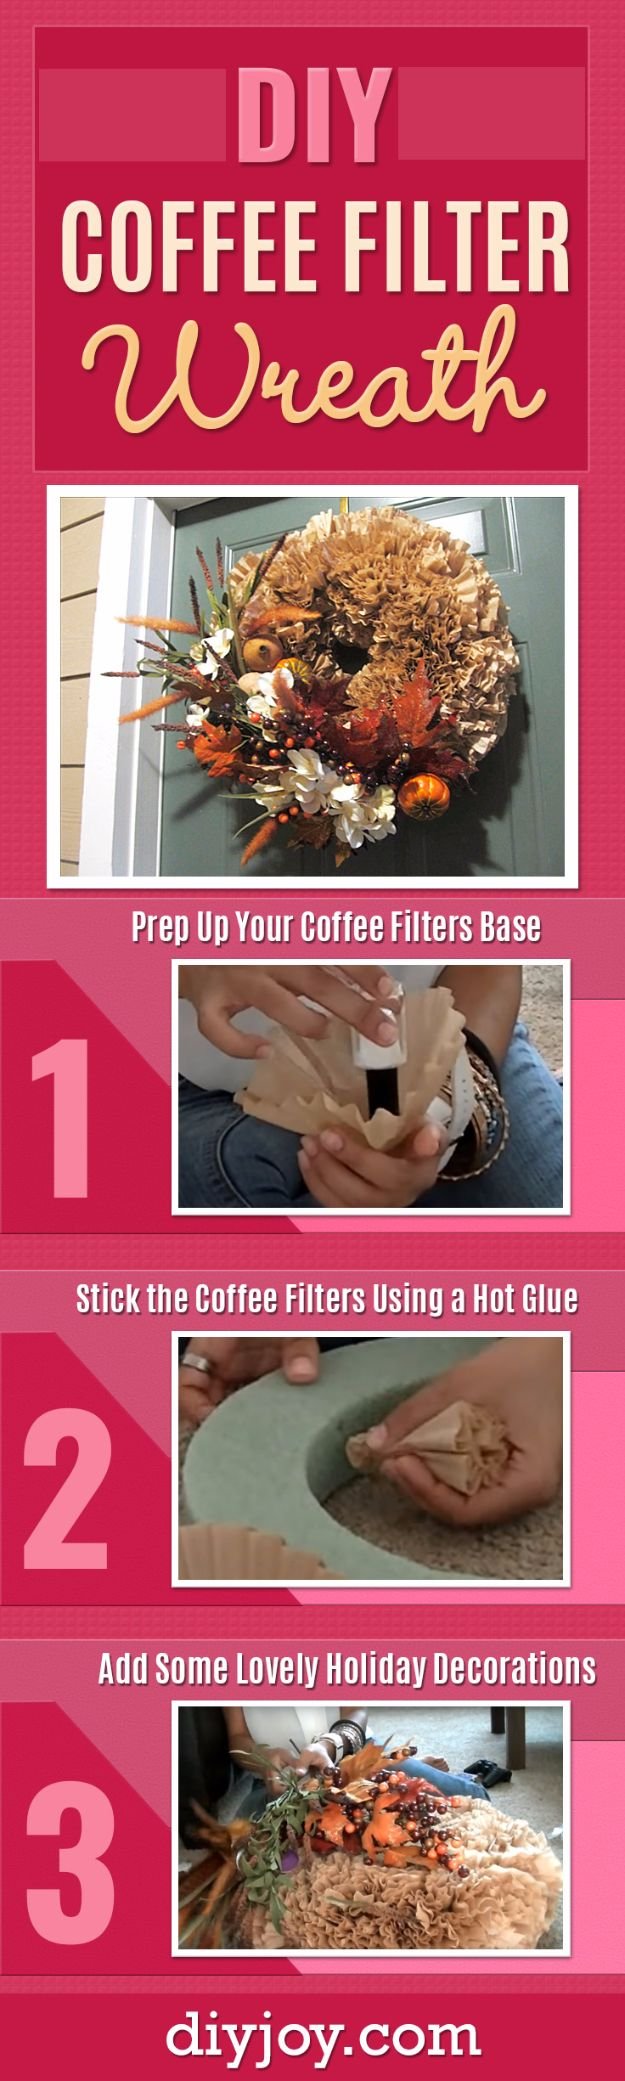 Best Crafts for Fall - DIY Fall Coffee Filter Wreath - DIY Mason Jar Ideas, Dollar Store Crafts, Rustic Pumpkin Ideas, Wreaths, Candles and Wall Art, Centerpieces, Wedding Decorations, Homemade Gifts, Craft Projects with Leaves, Flowers and Burlap, Painted Art, Candles and Luminaries for Cool Home Decor - Quick and Easy Projects With Step by Step Tutorials and Instructions http://diyjoy.com/best-crafts-for-fall